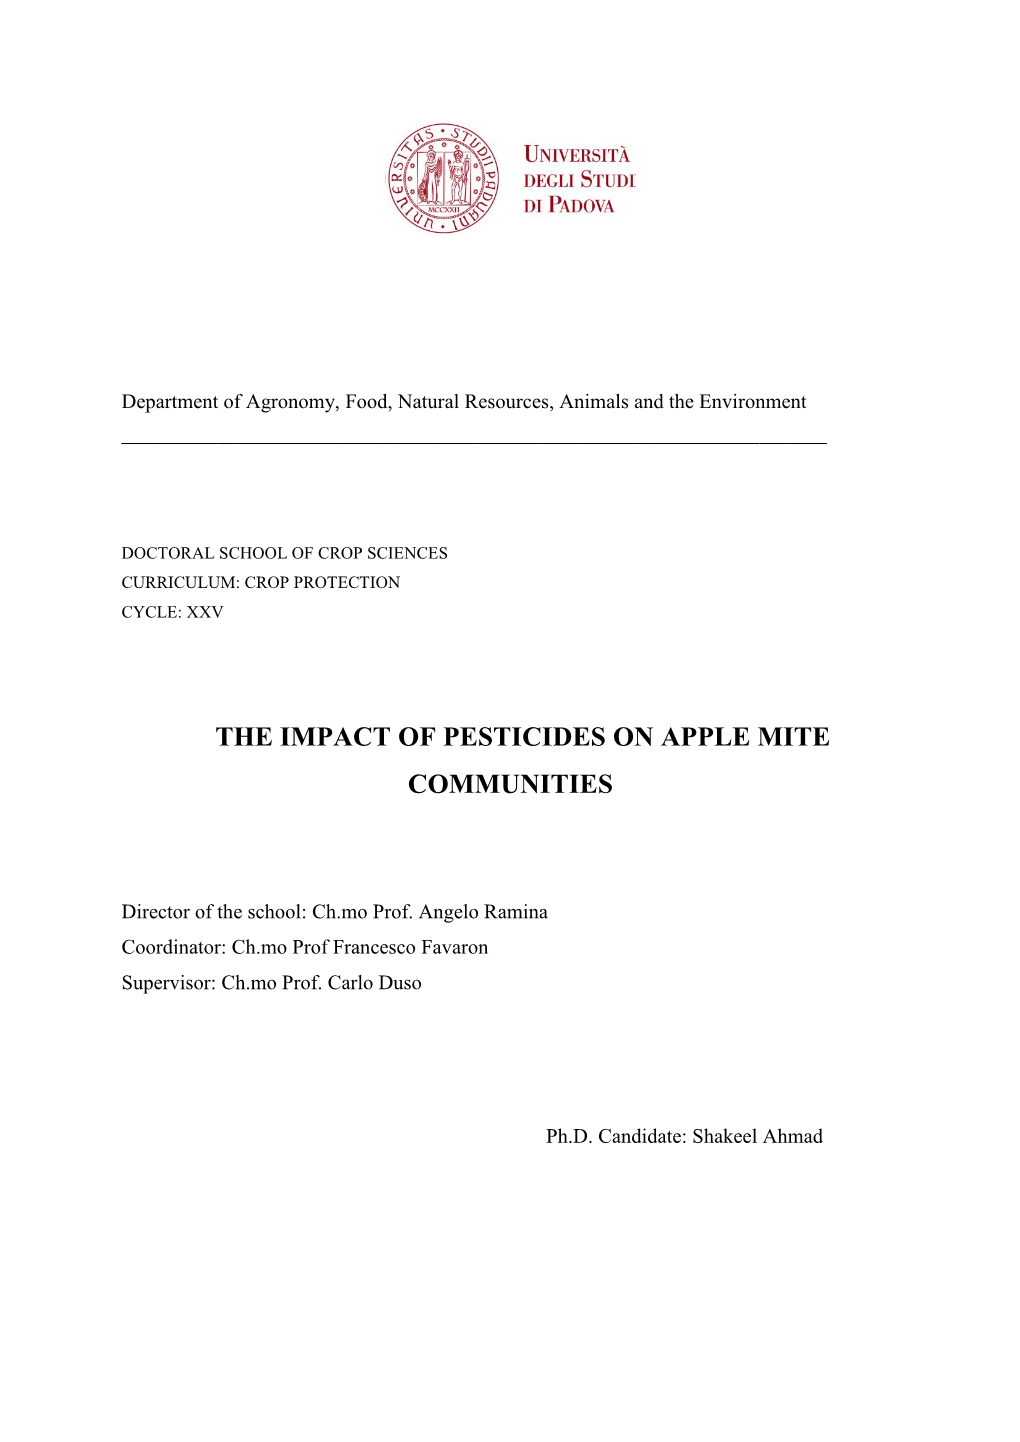 The Impact of Pesticides on Apple Mite Communities